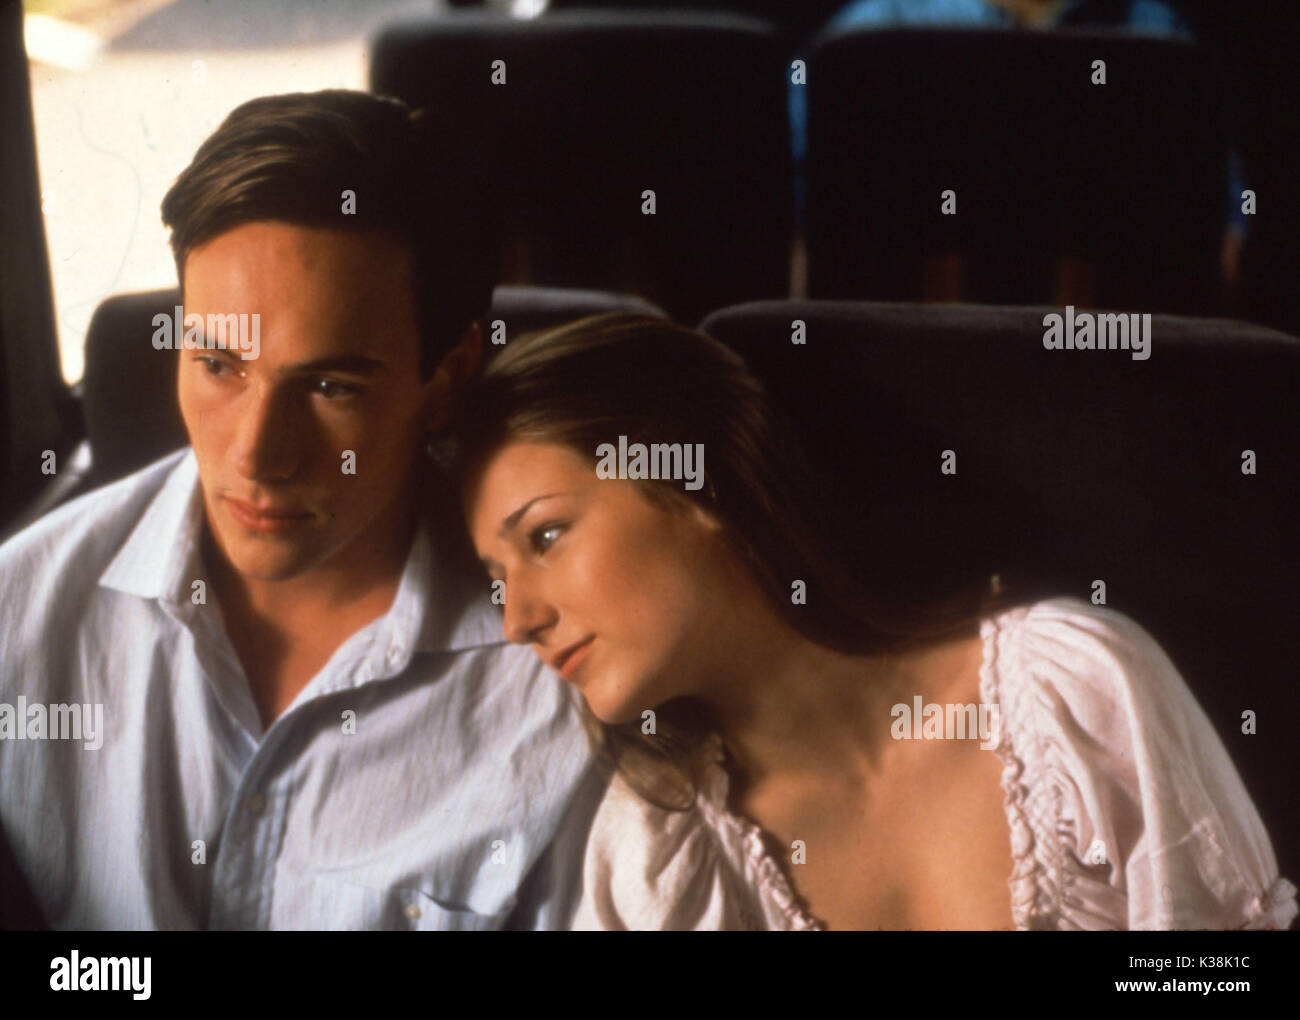 HERE ON EARTH CHRIS KLEIN AND LEELEE SOBIESKI     Date: 2000 Stock Photo